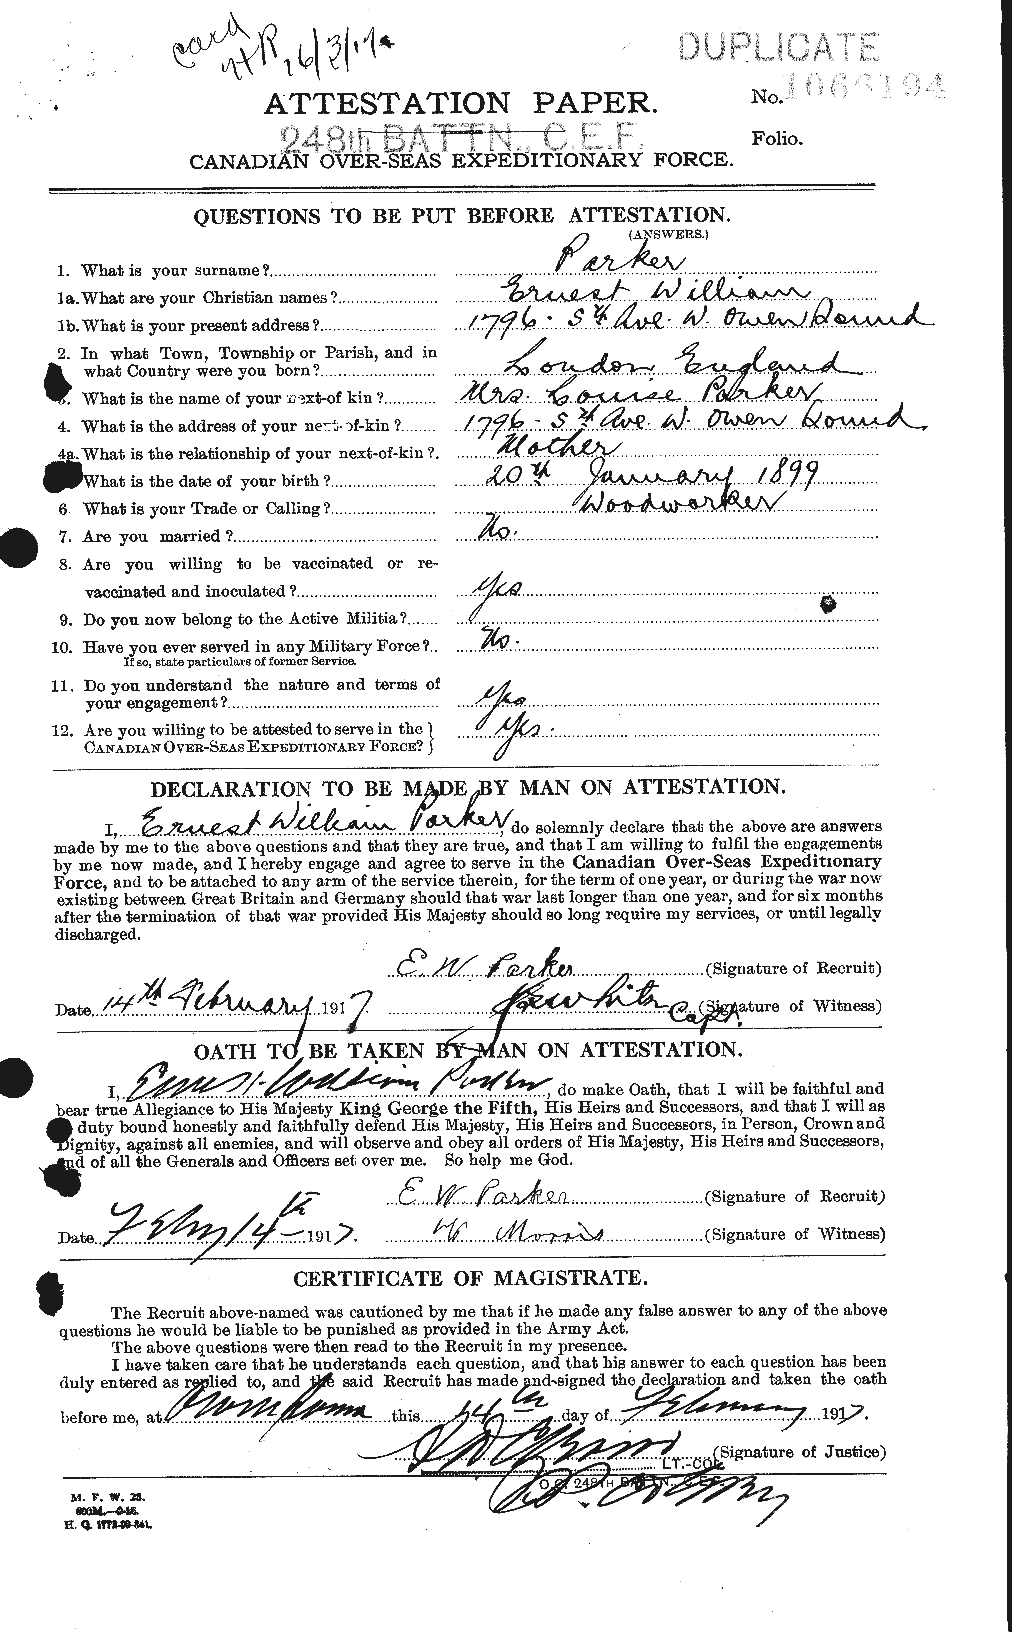 Personnel Records of the First World War - CEF 565170a